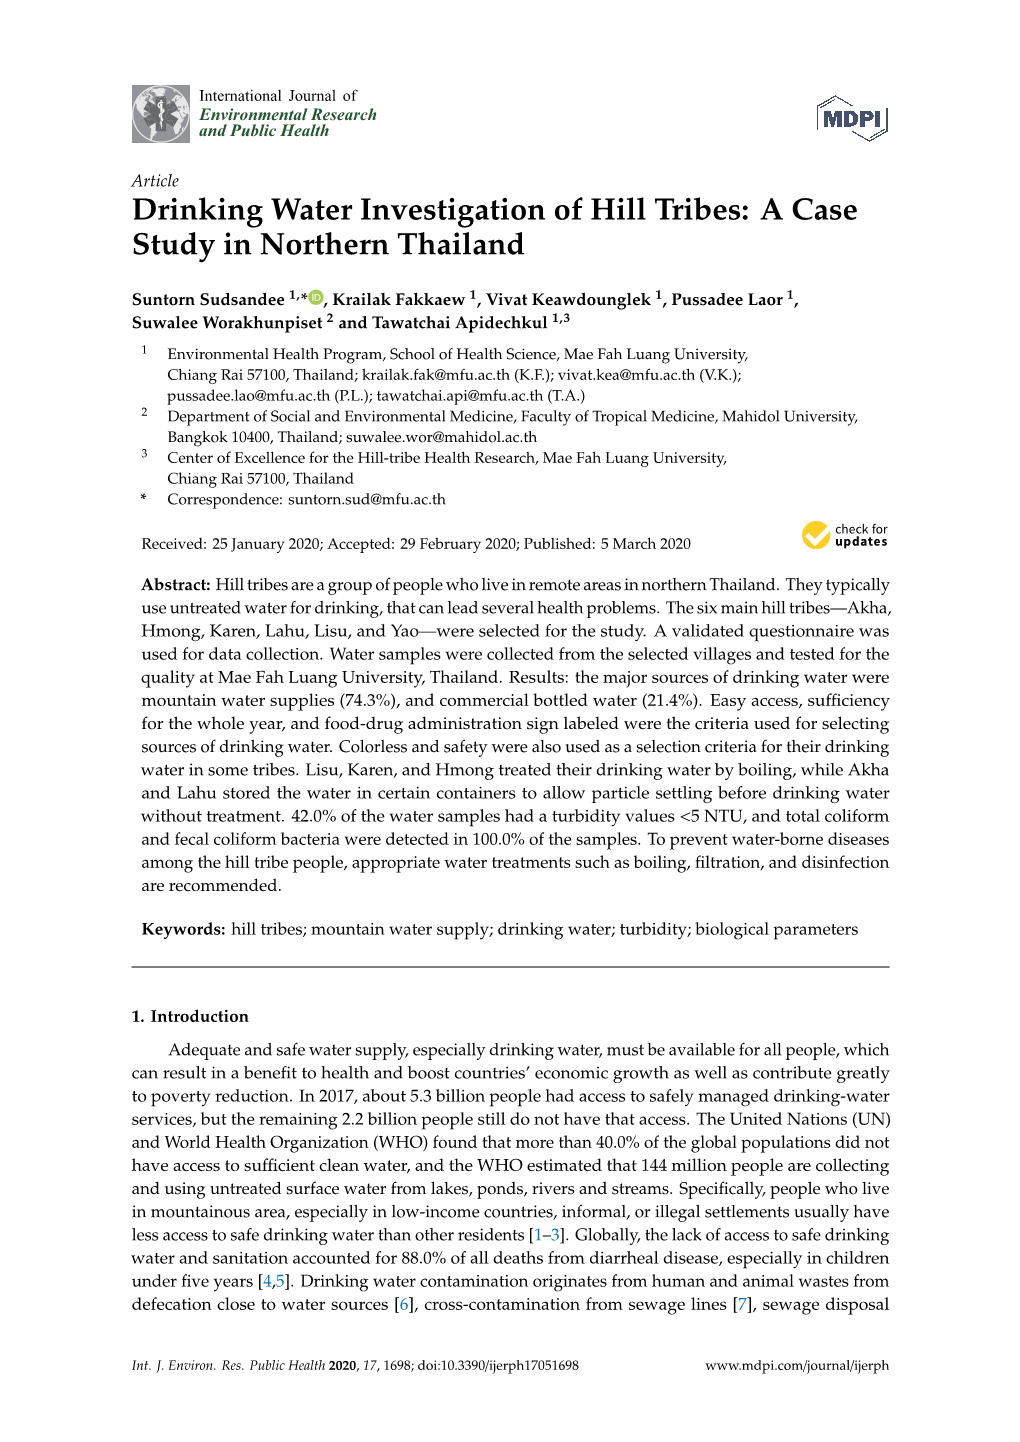 Drinking Water Investigation of Hill Tribes: a Case Study in Northern Thailand